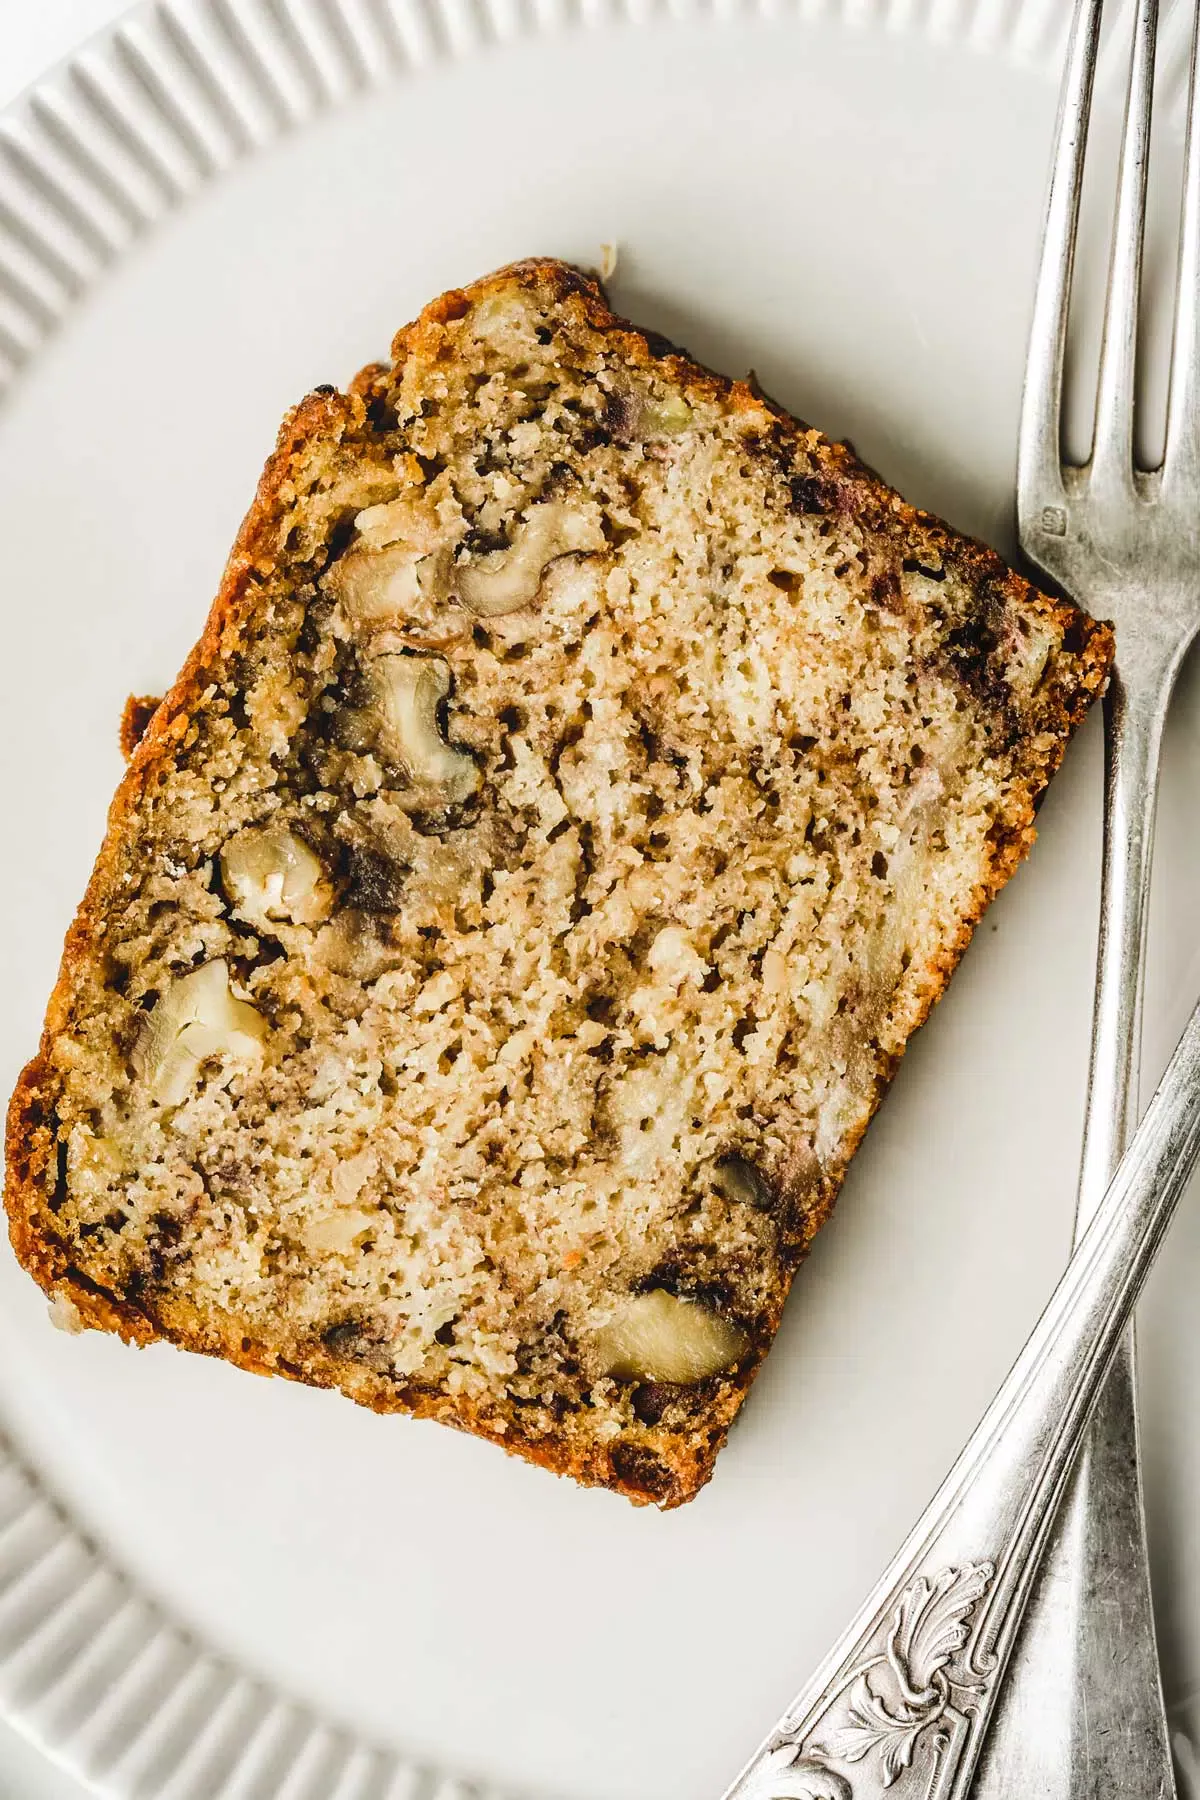 Banana nut cake slice on a plate with forks